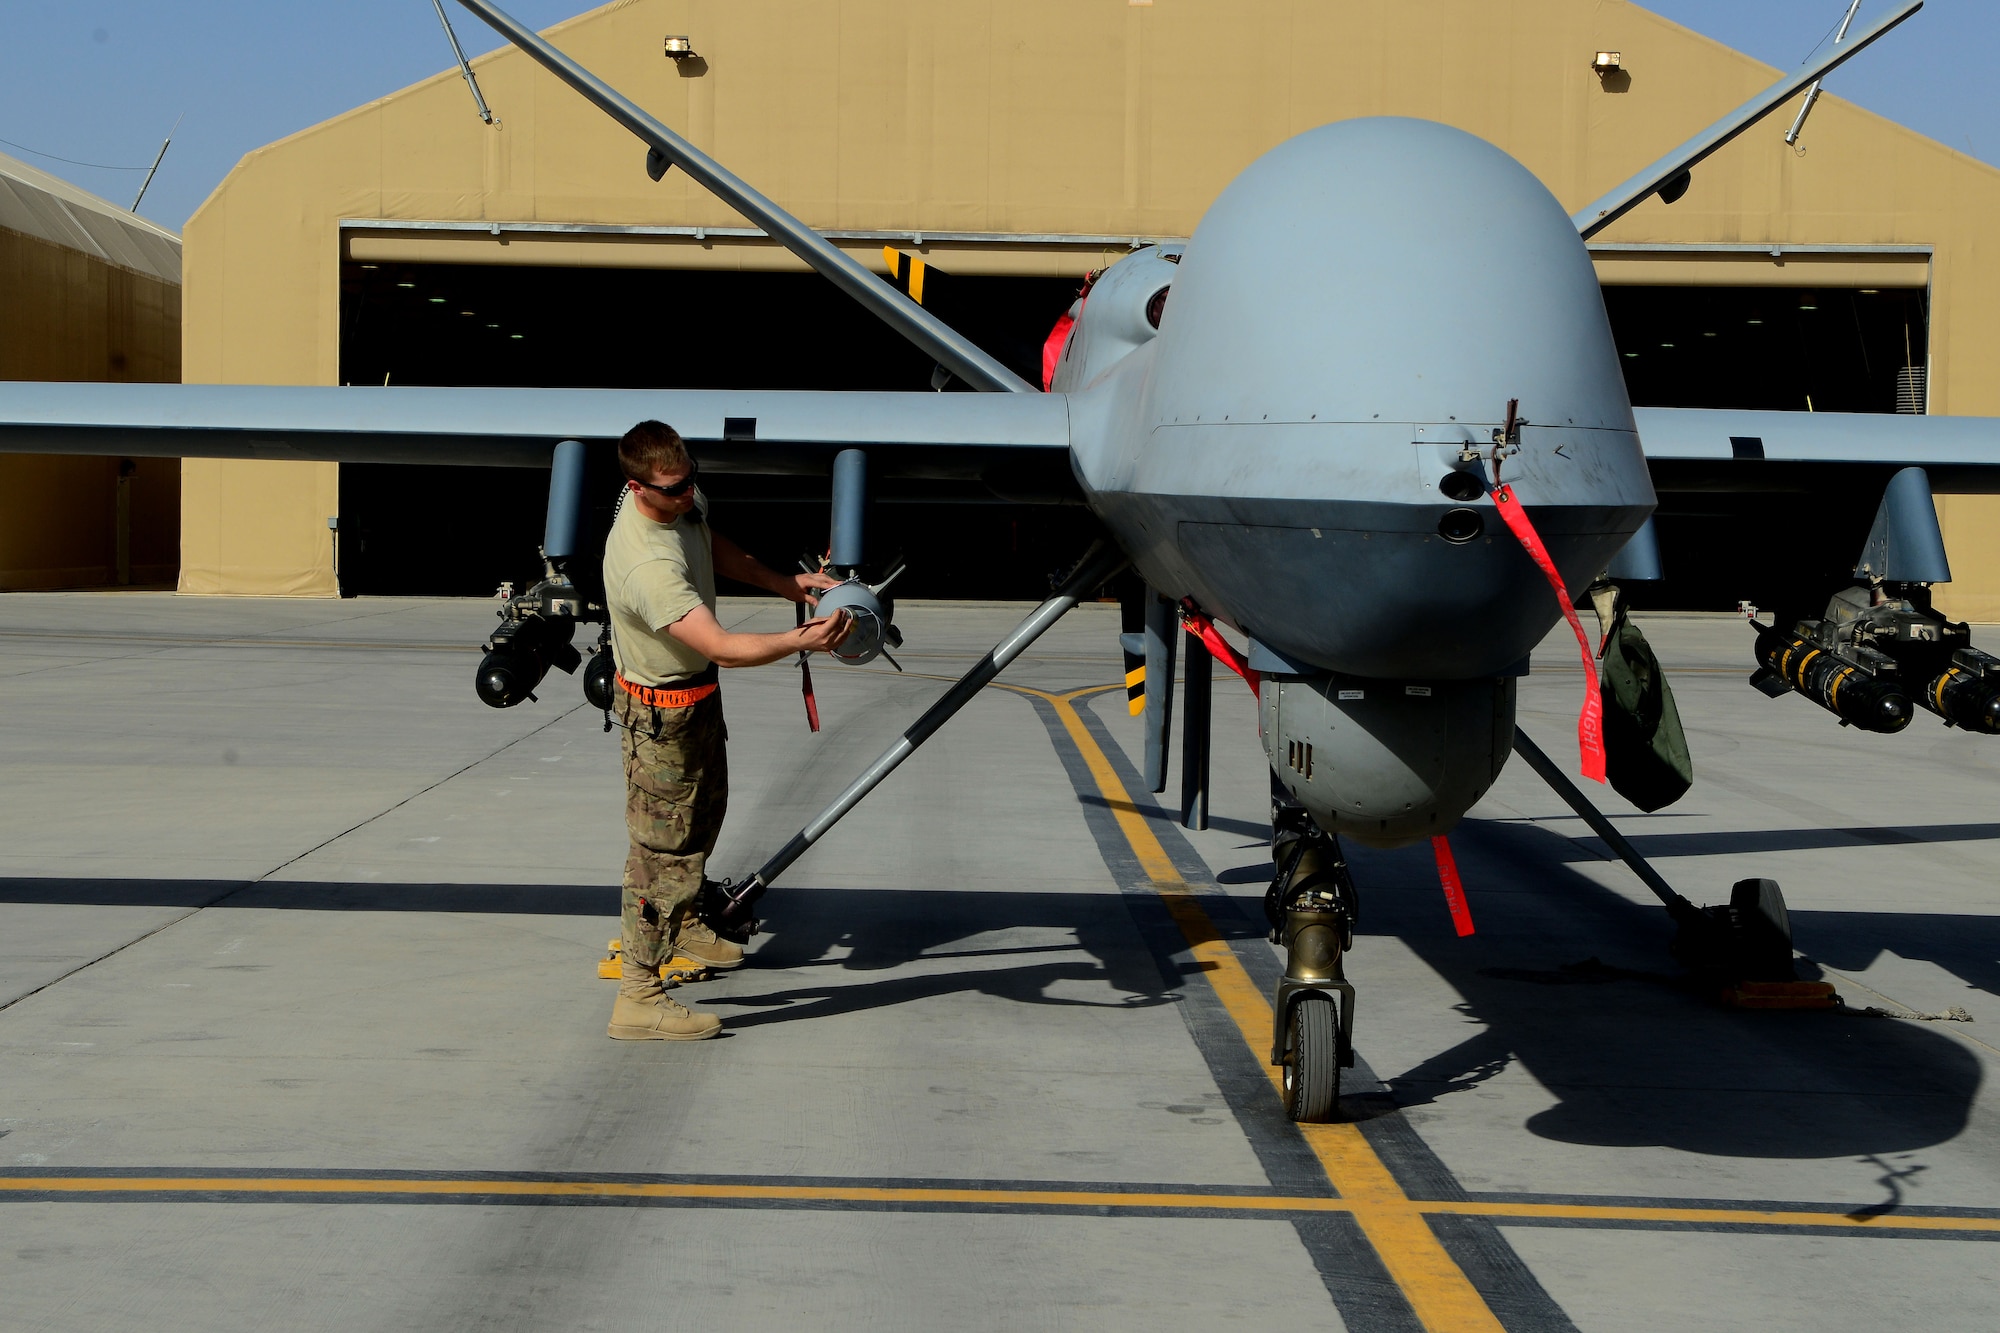 Staff Sgt. Nelson Cherry inspects an MQ-9 Reaper with the 62nd Expeditionary Reconnaissance Squadron Aug. 18, 2014, at Kandahar Airfield, Afghanistan. The Reaper is launched, recovered and maintained here. It is also remotely operated by pilots in bases located in the U.S. Cherry is an aircraft armament systems specialist with the 451st Expeditionary Aircraft Maintenance Squadron. (U.S. Air Force photo/Staff Sgt. Evelyn Chavez)